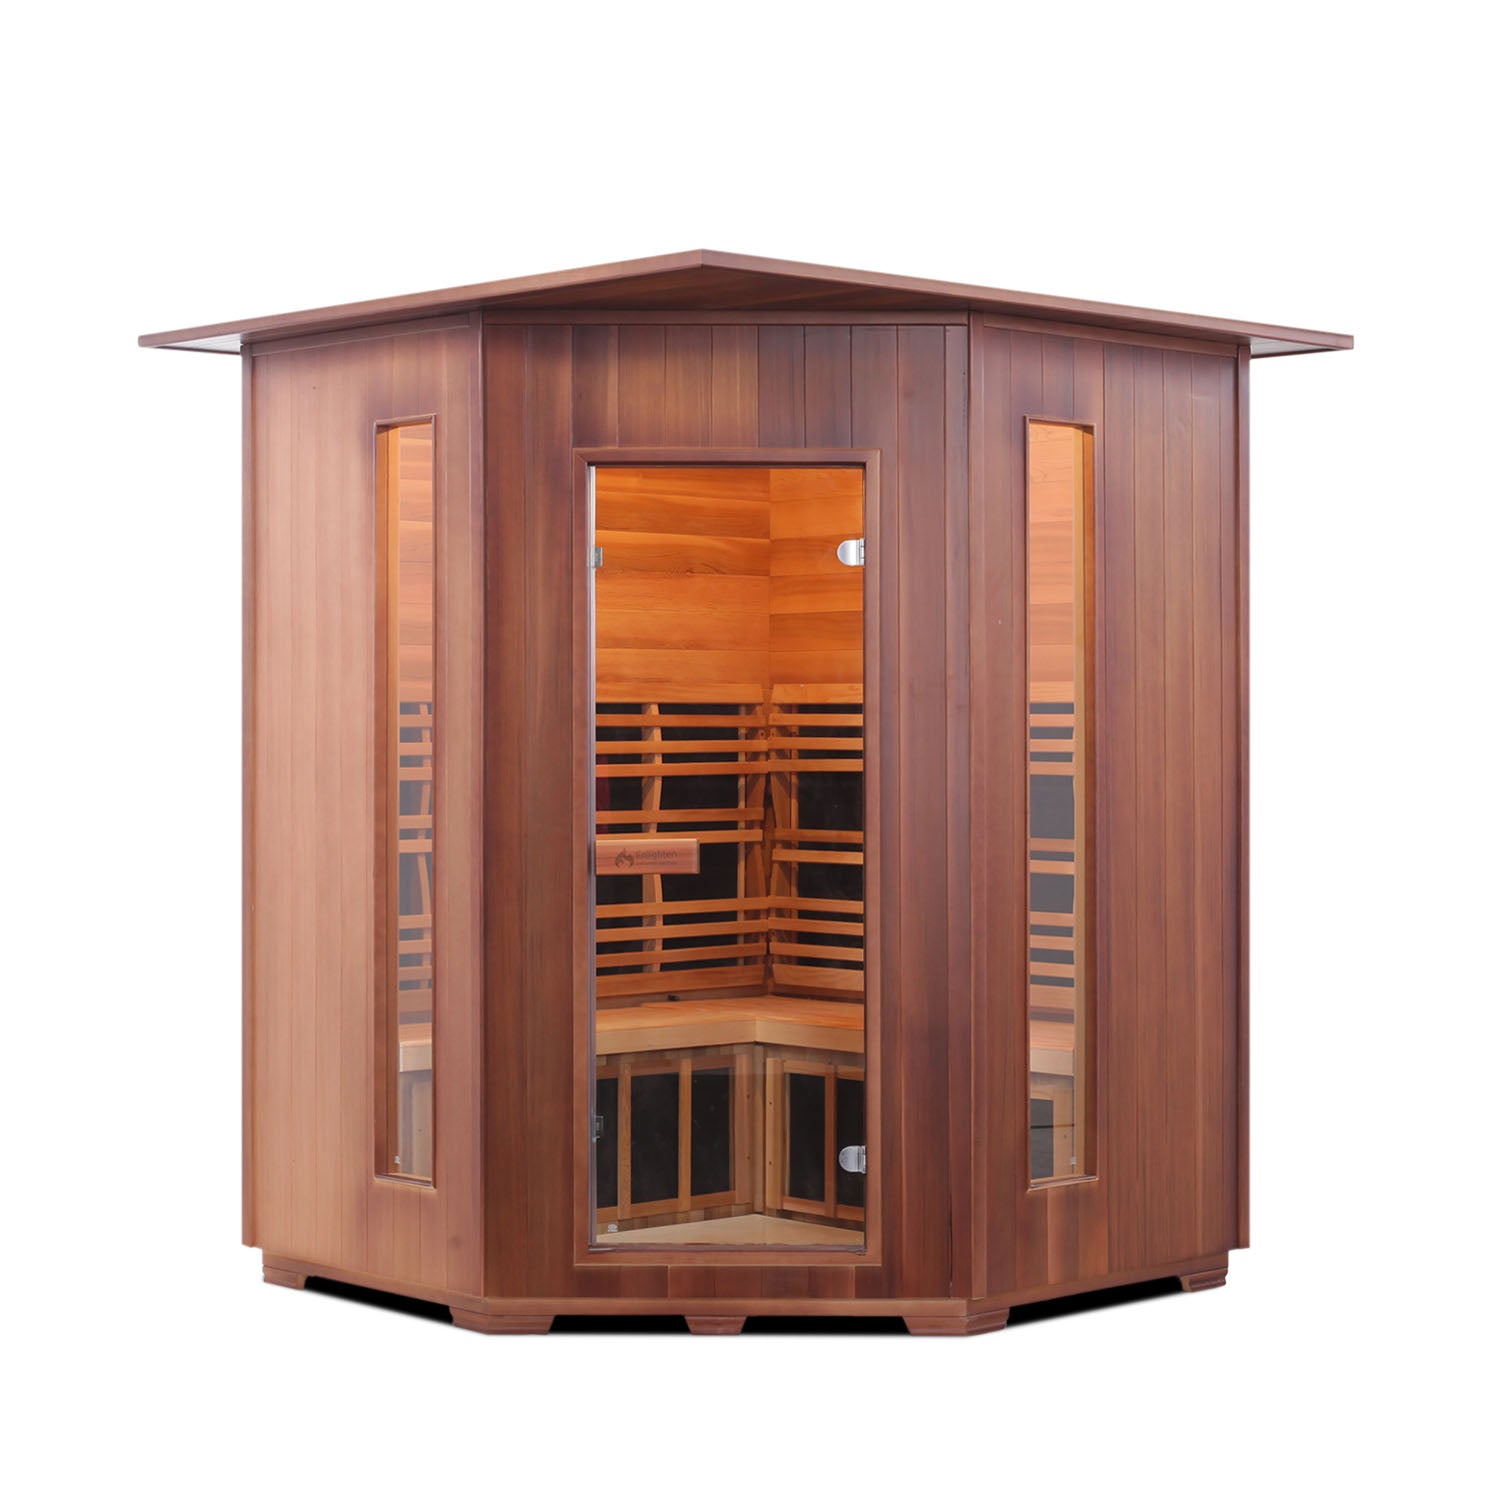 InfraNature Original Rustic Infrared Sauna Canadian Red Cedar Wood Outside And Inside with indoor roof and glass door and windows